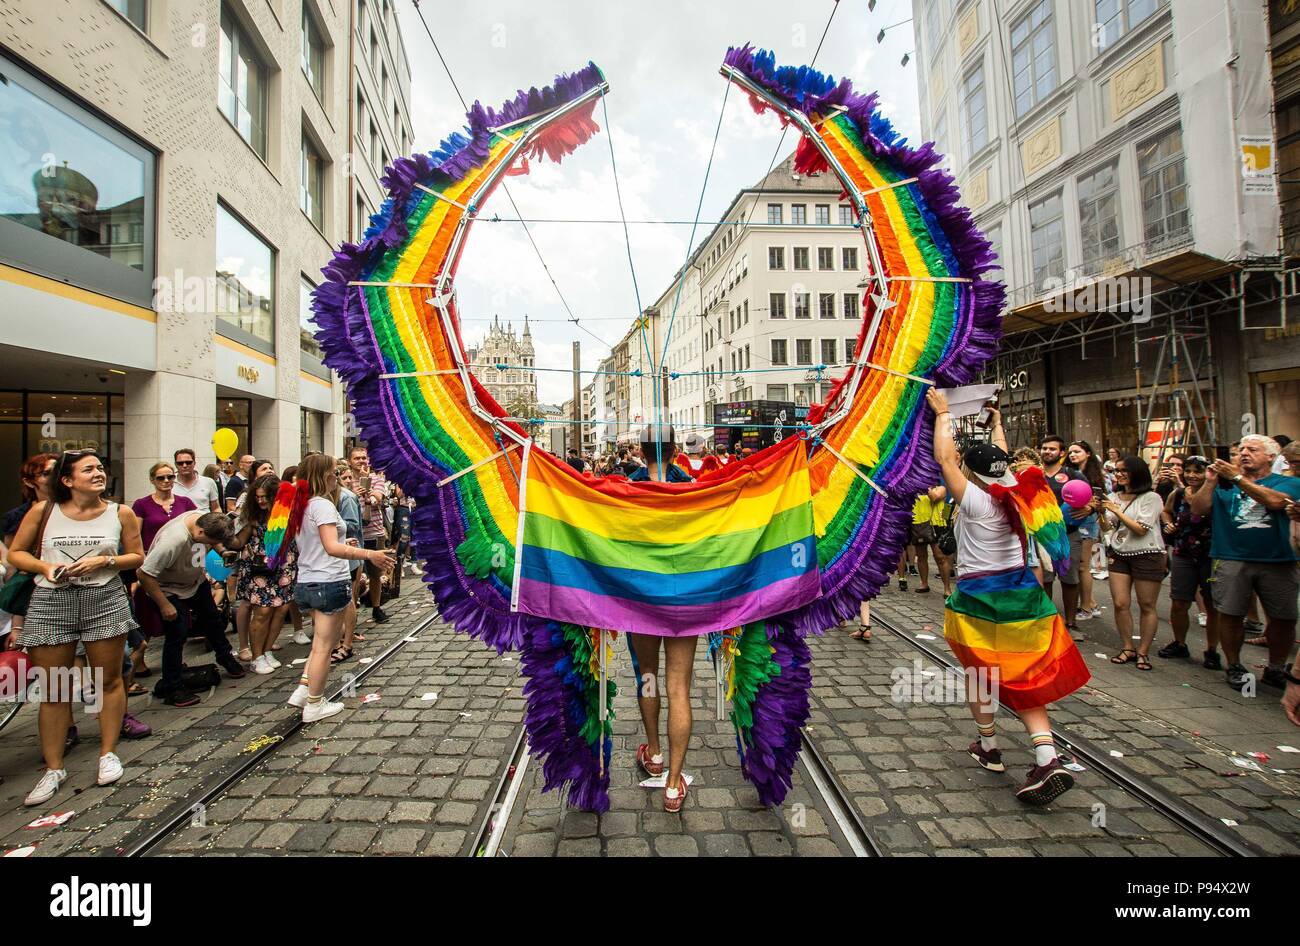 Munich, Bavaria, Germany. 14th July, 2018. A participant of the Christopher  Street Day parade in Munich, Germany shows off his large construction of  pride wings. Under the banner of "Bunt ist die